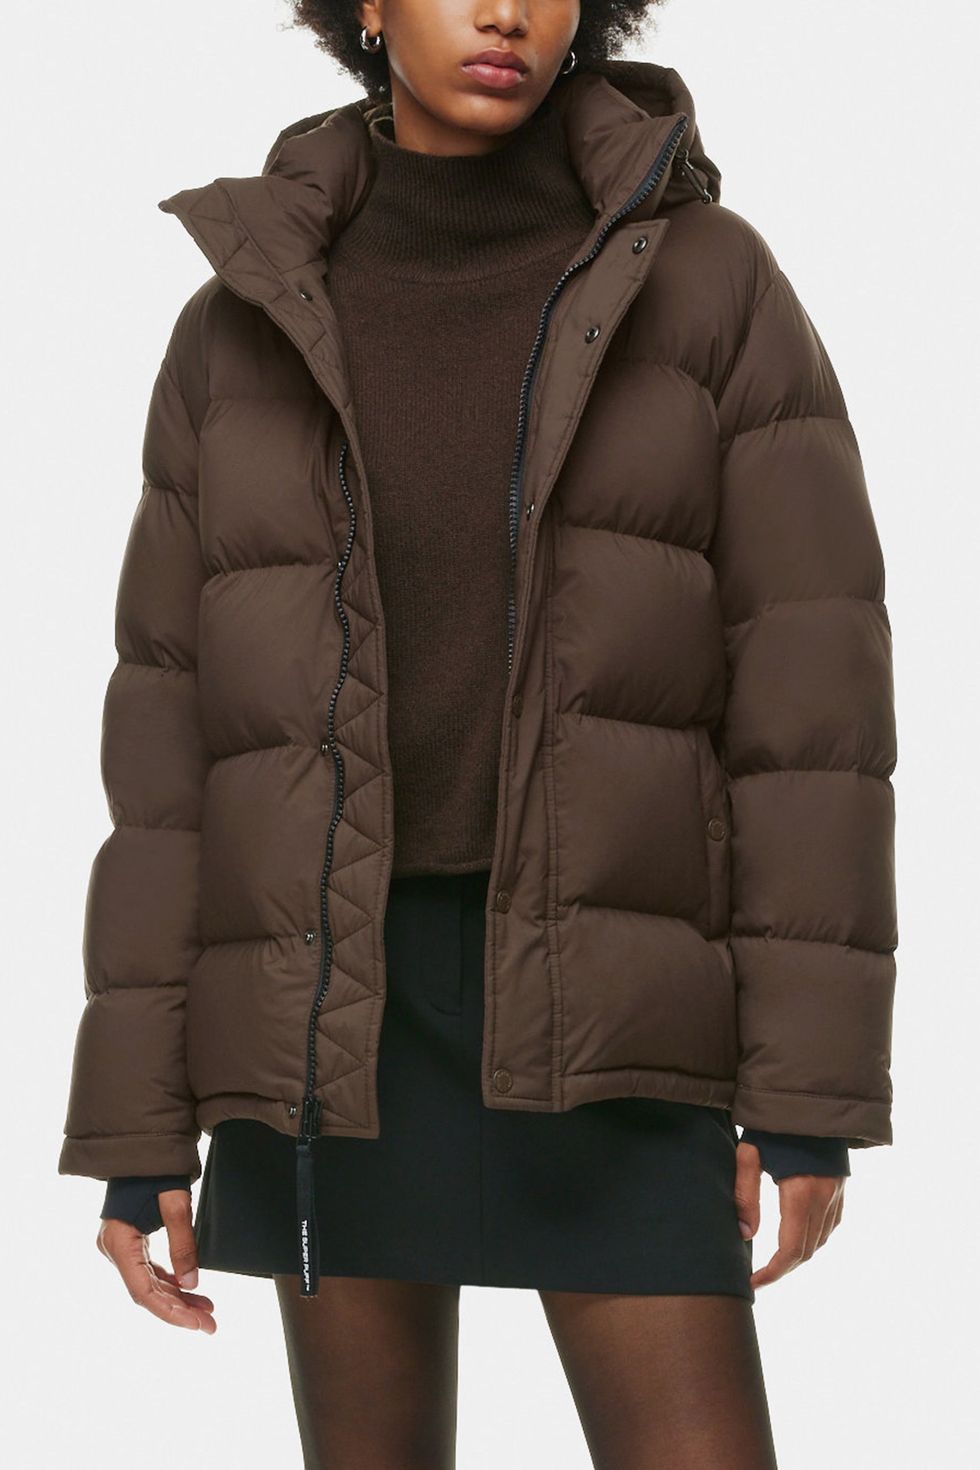 Stay warm this winter with a Super Puff jacket